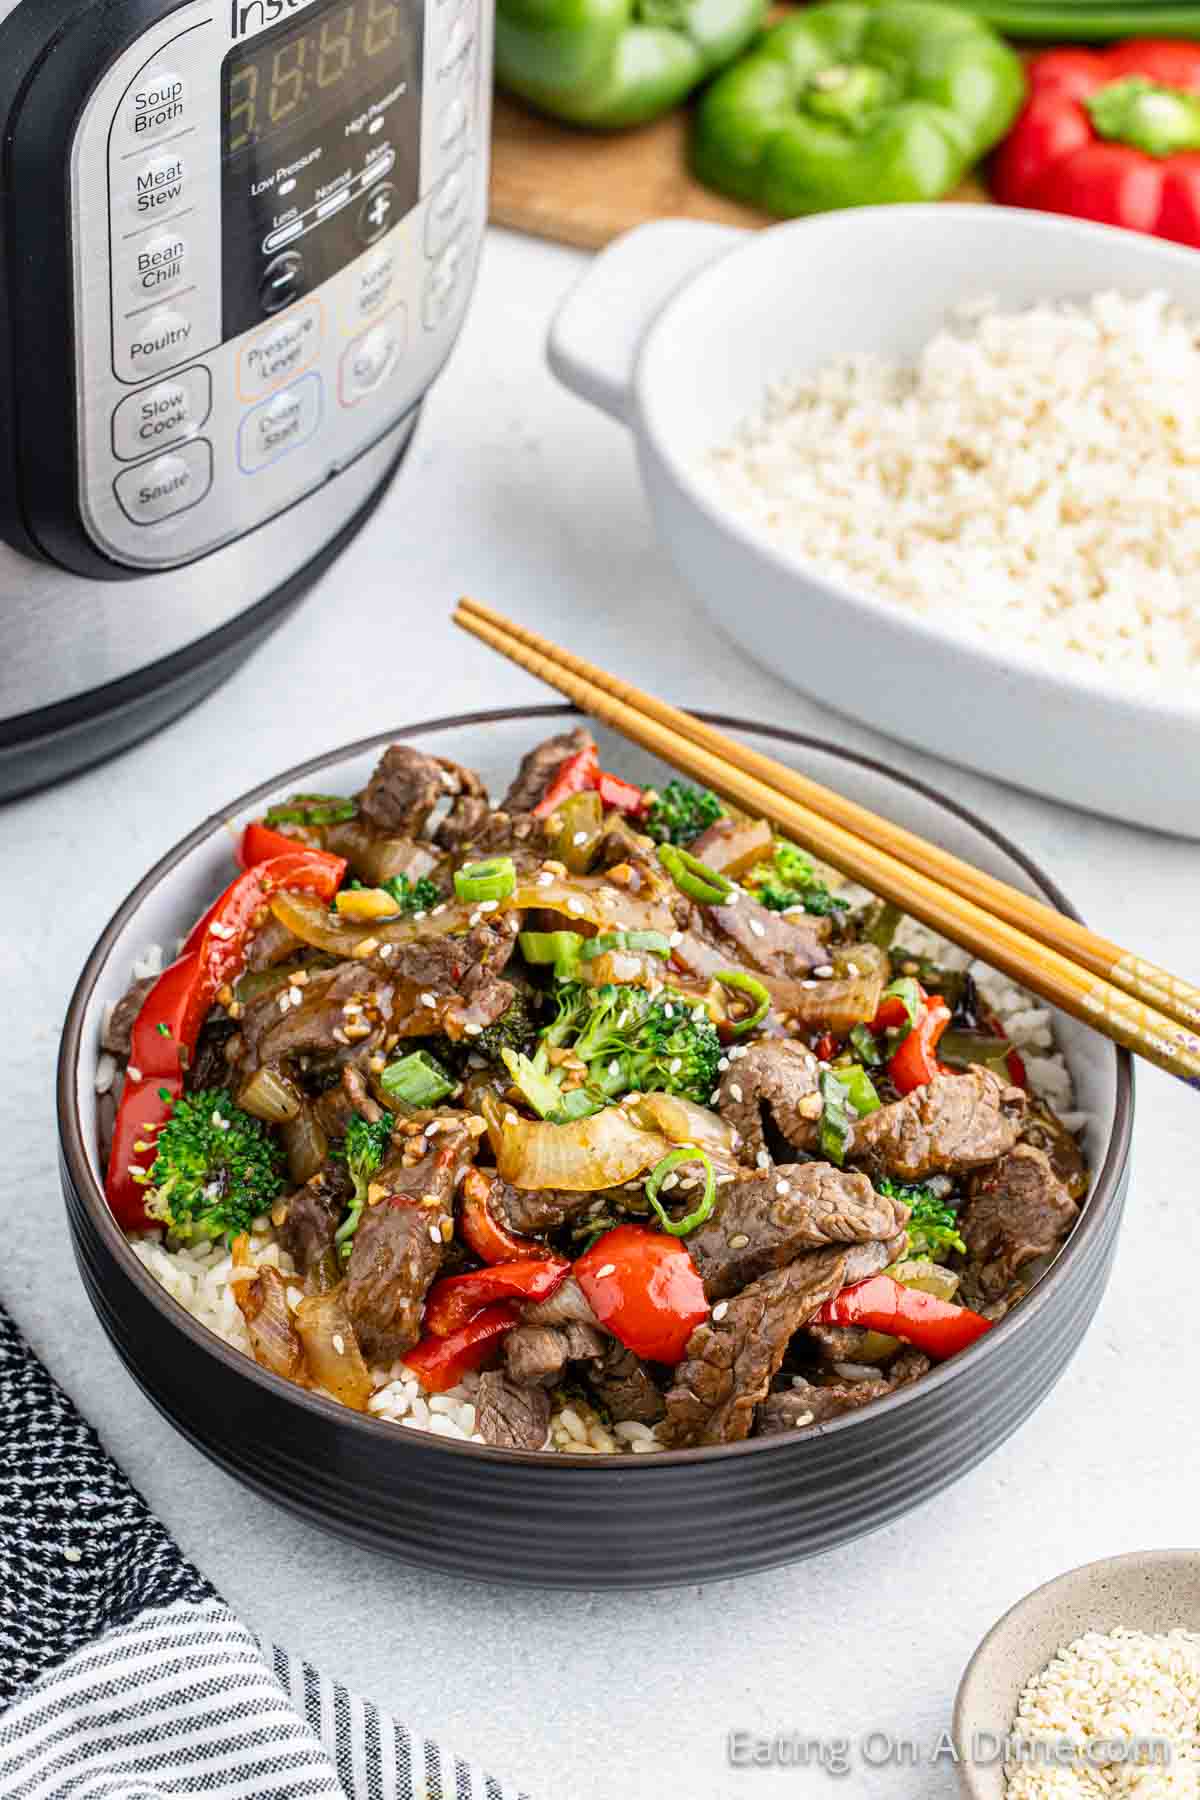 Beef Stir Fry in a bowl with broccoli, red peppers and onions. Chopsticks are on top of the bowl with a bowl of white rice in the background